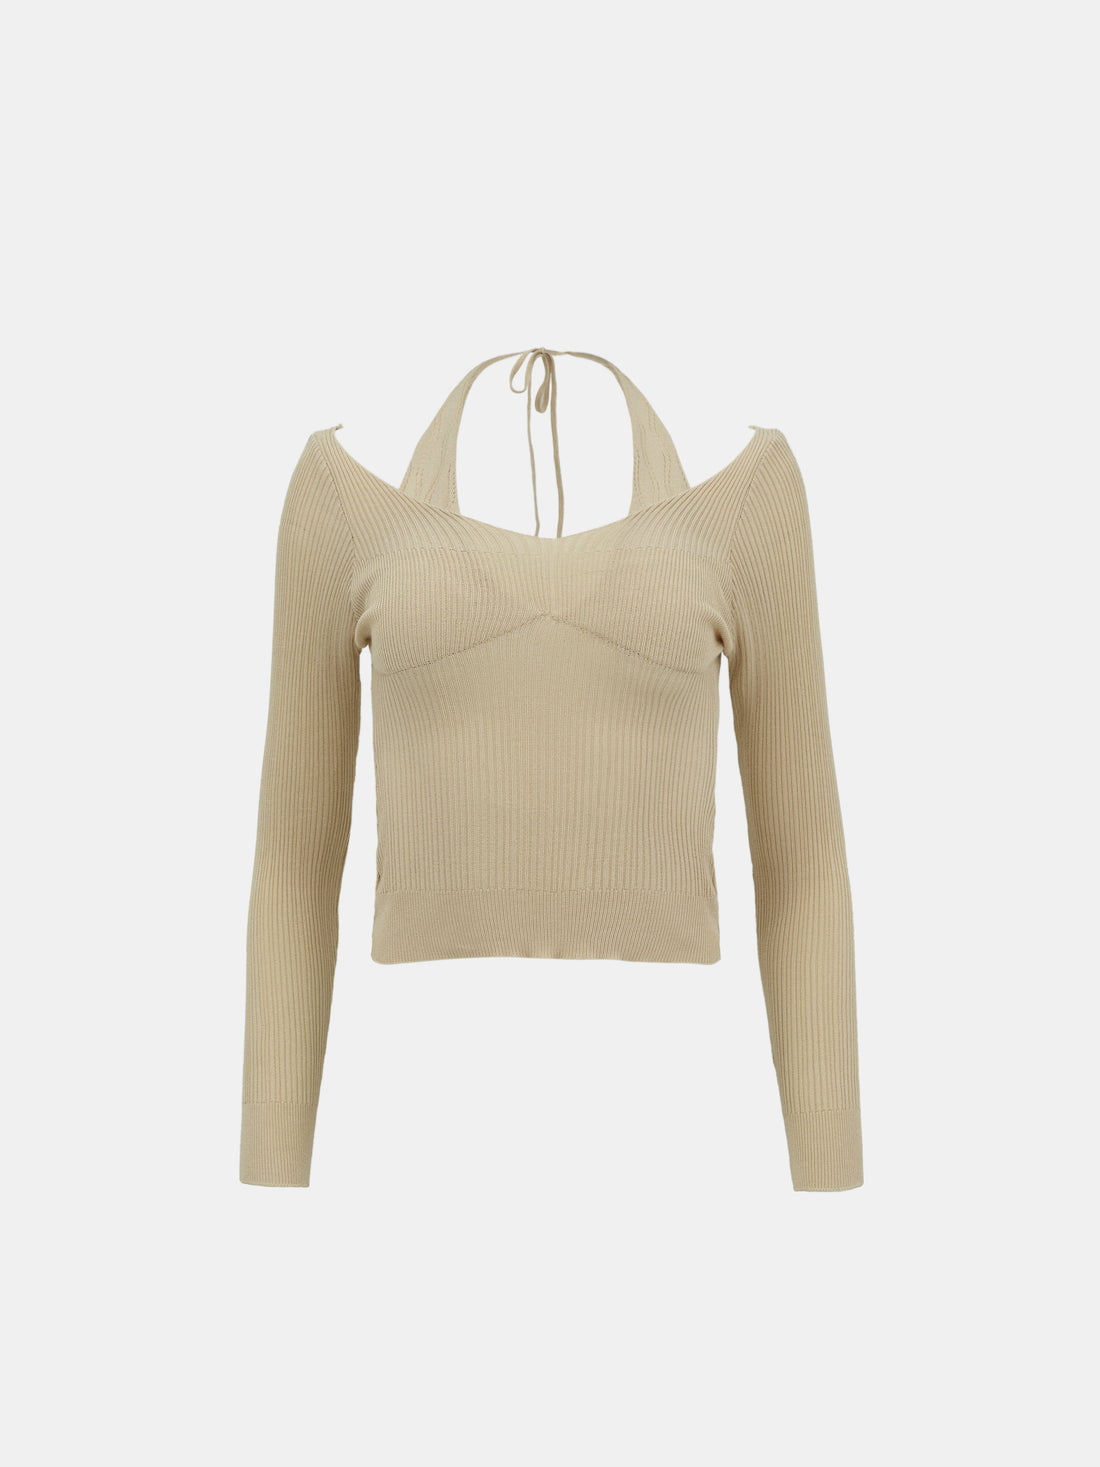 Duo Layered Knit Top, Buttermilk – SourceUnknown